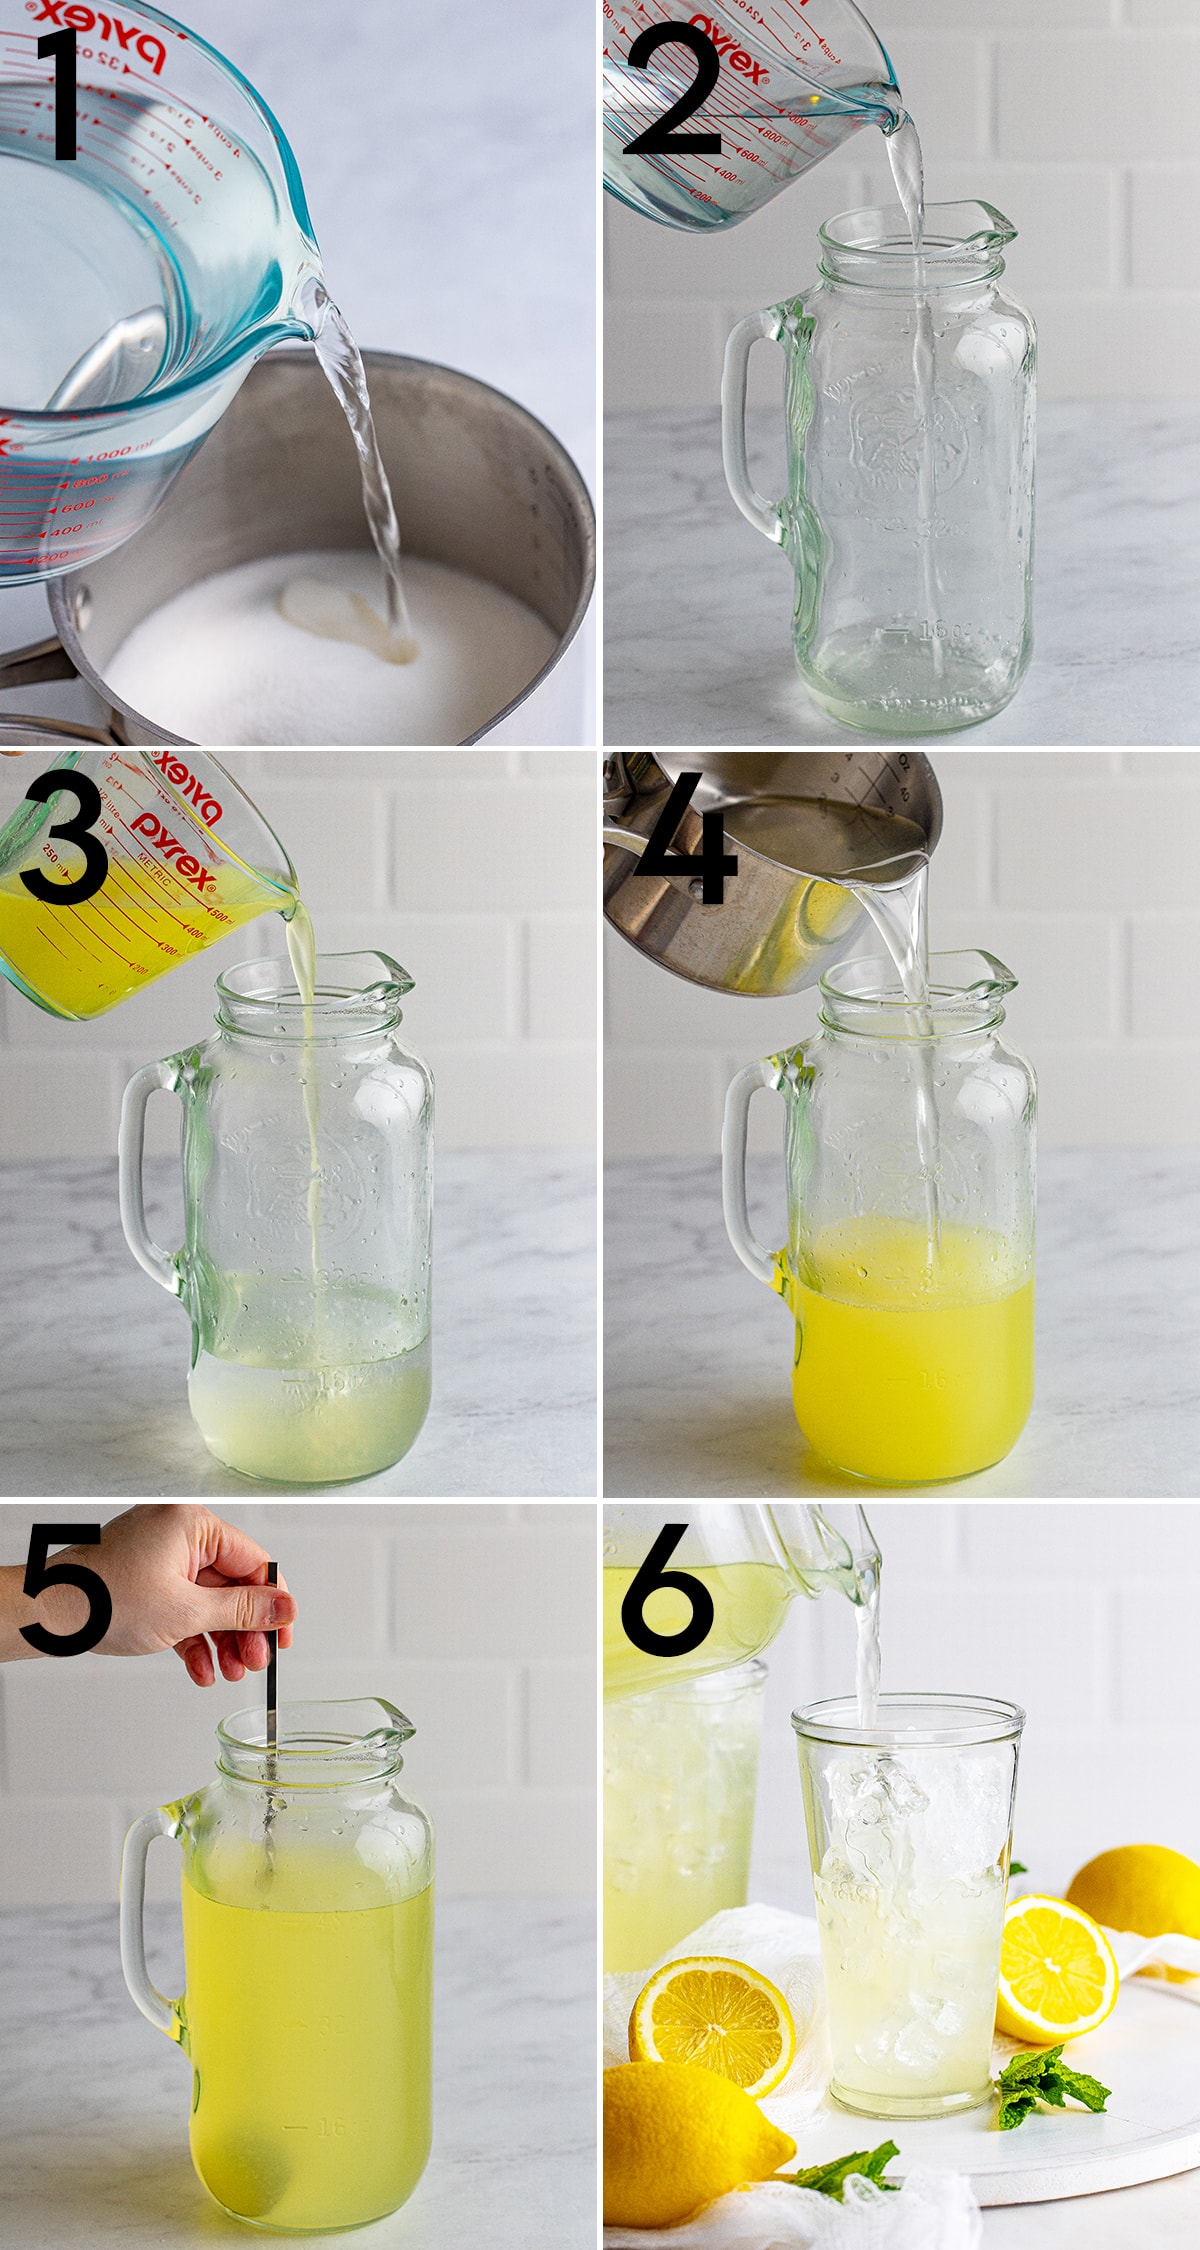 A collage of 6 photos showing the steps to make lemonade